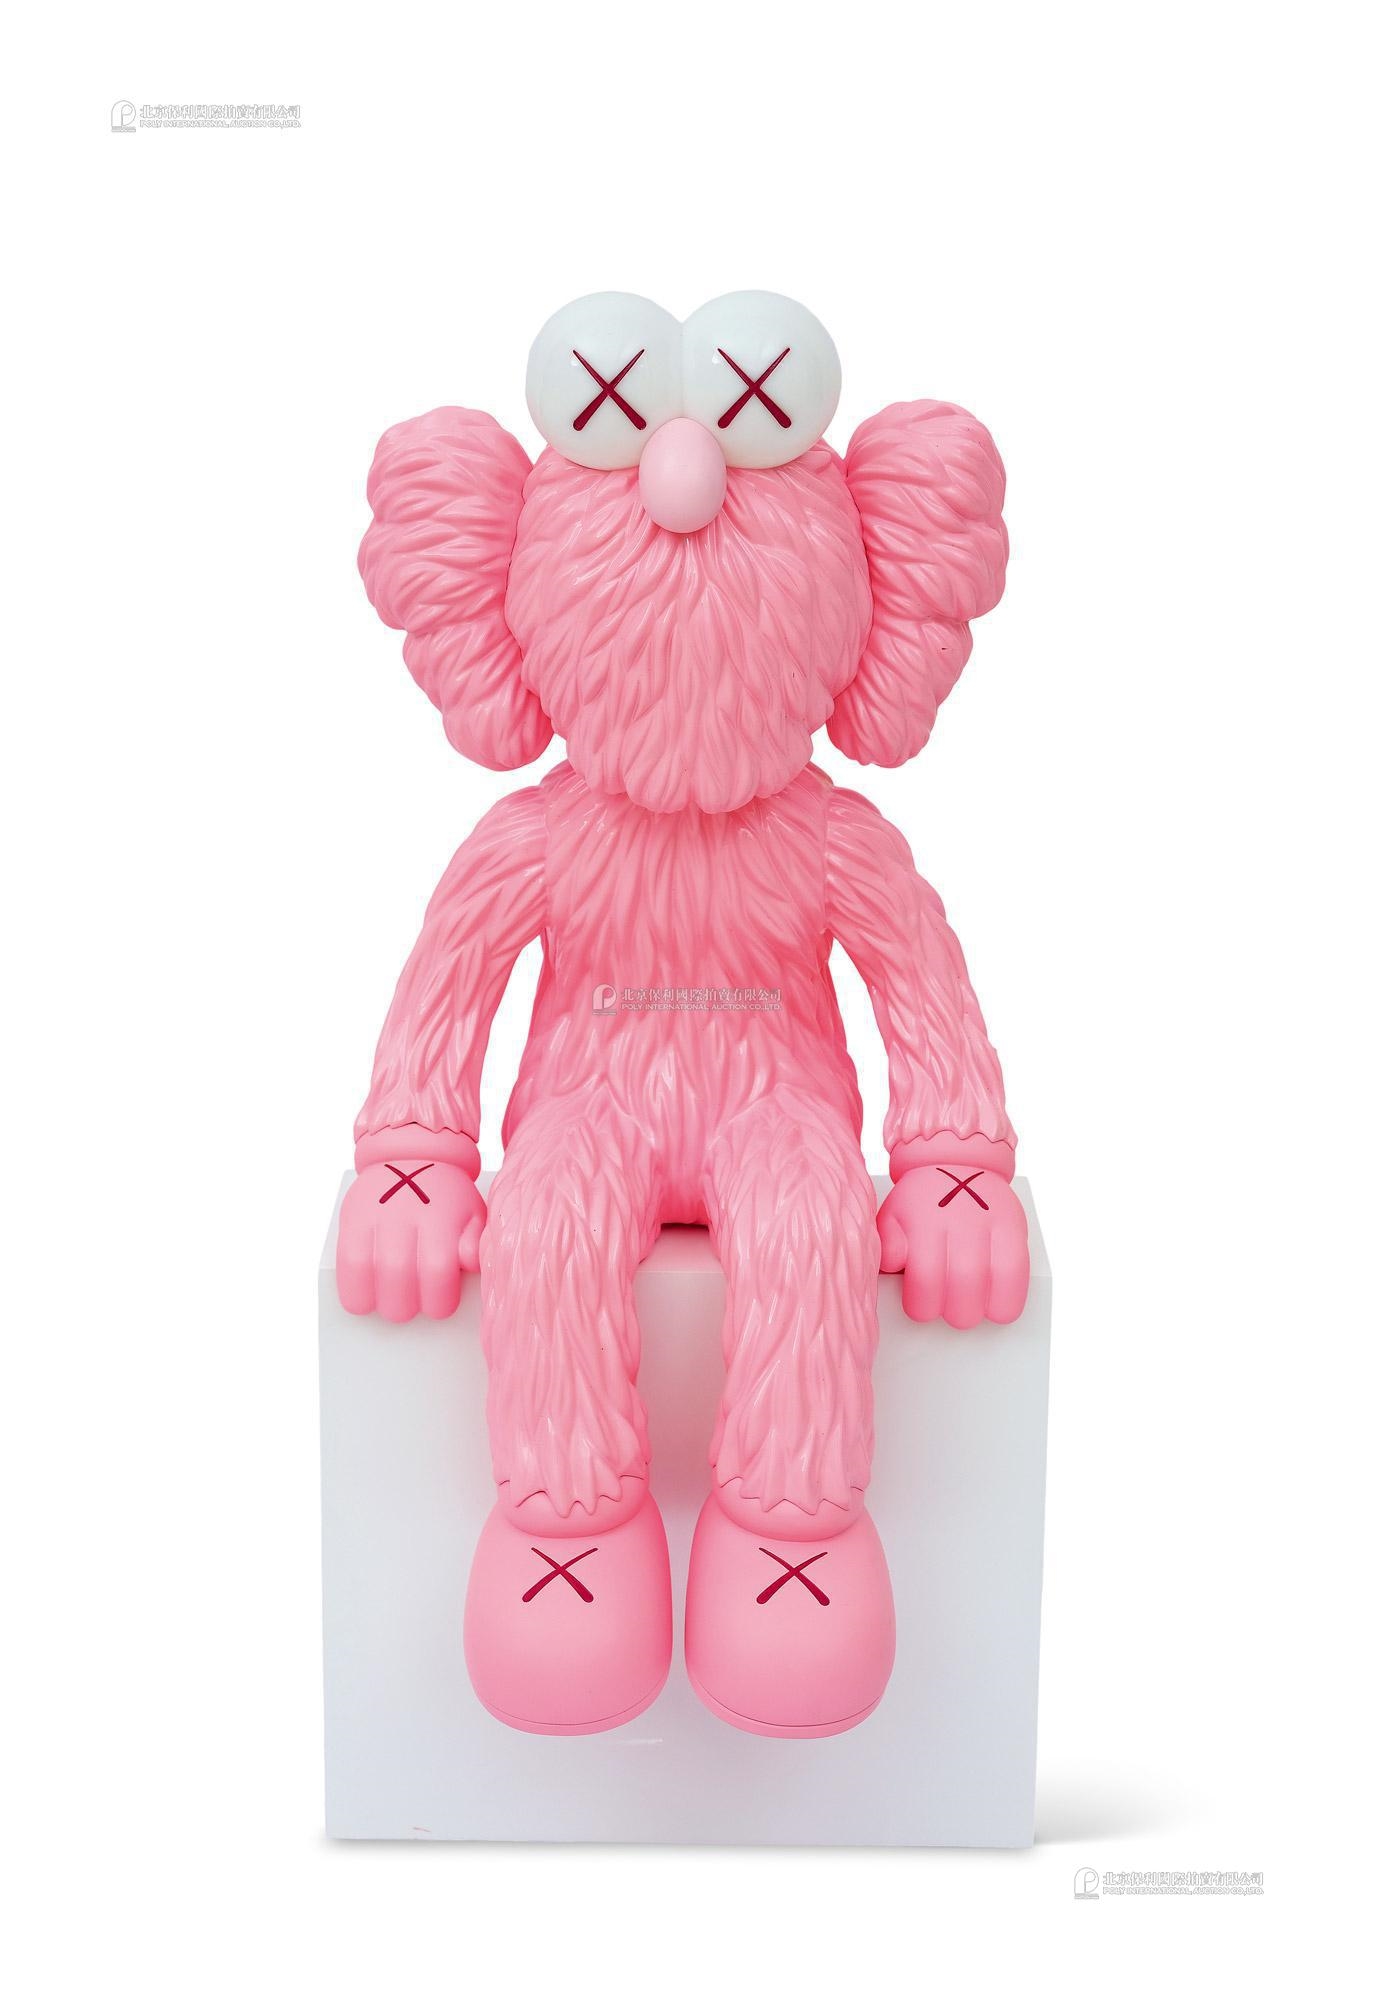 Seeing (Pink), 2019 by KAWS